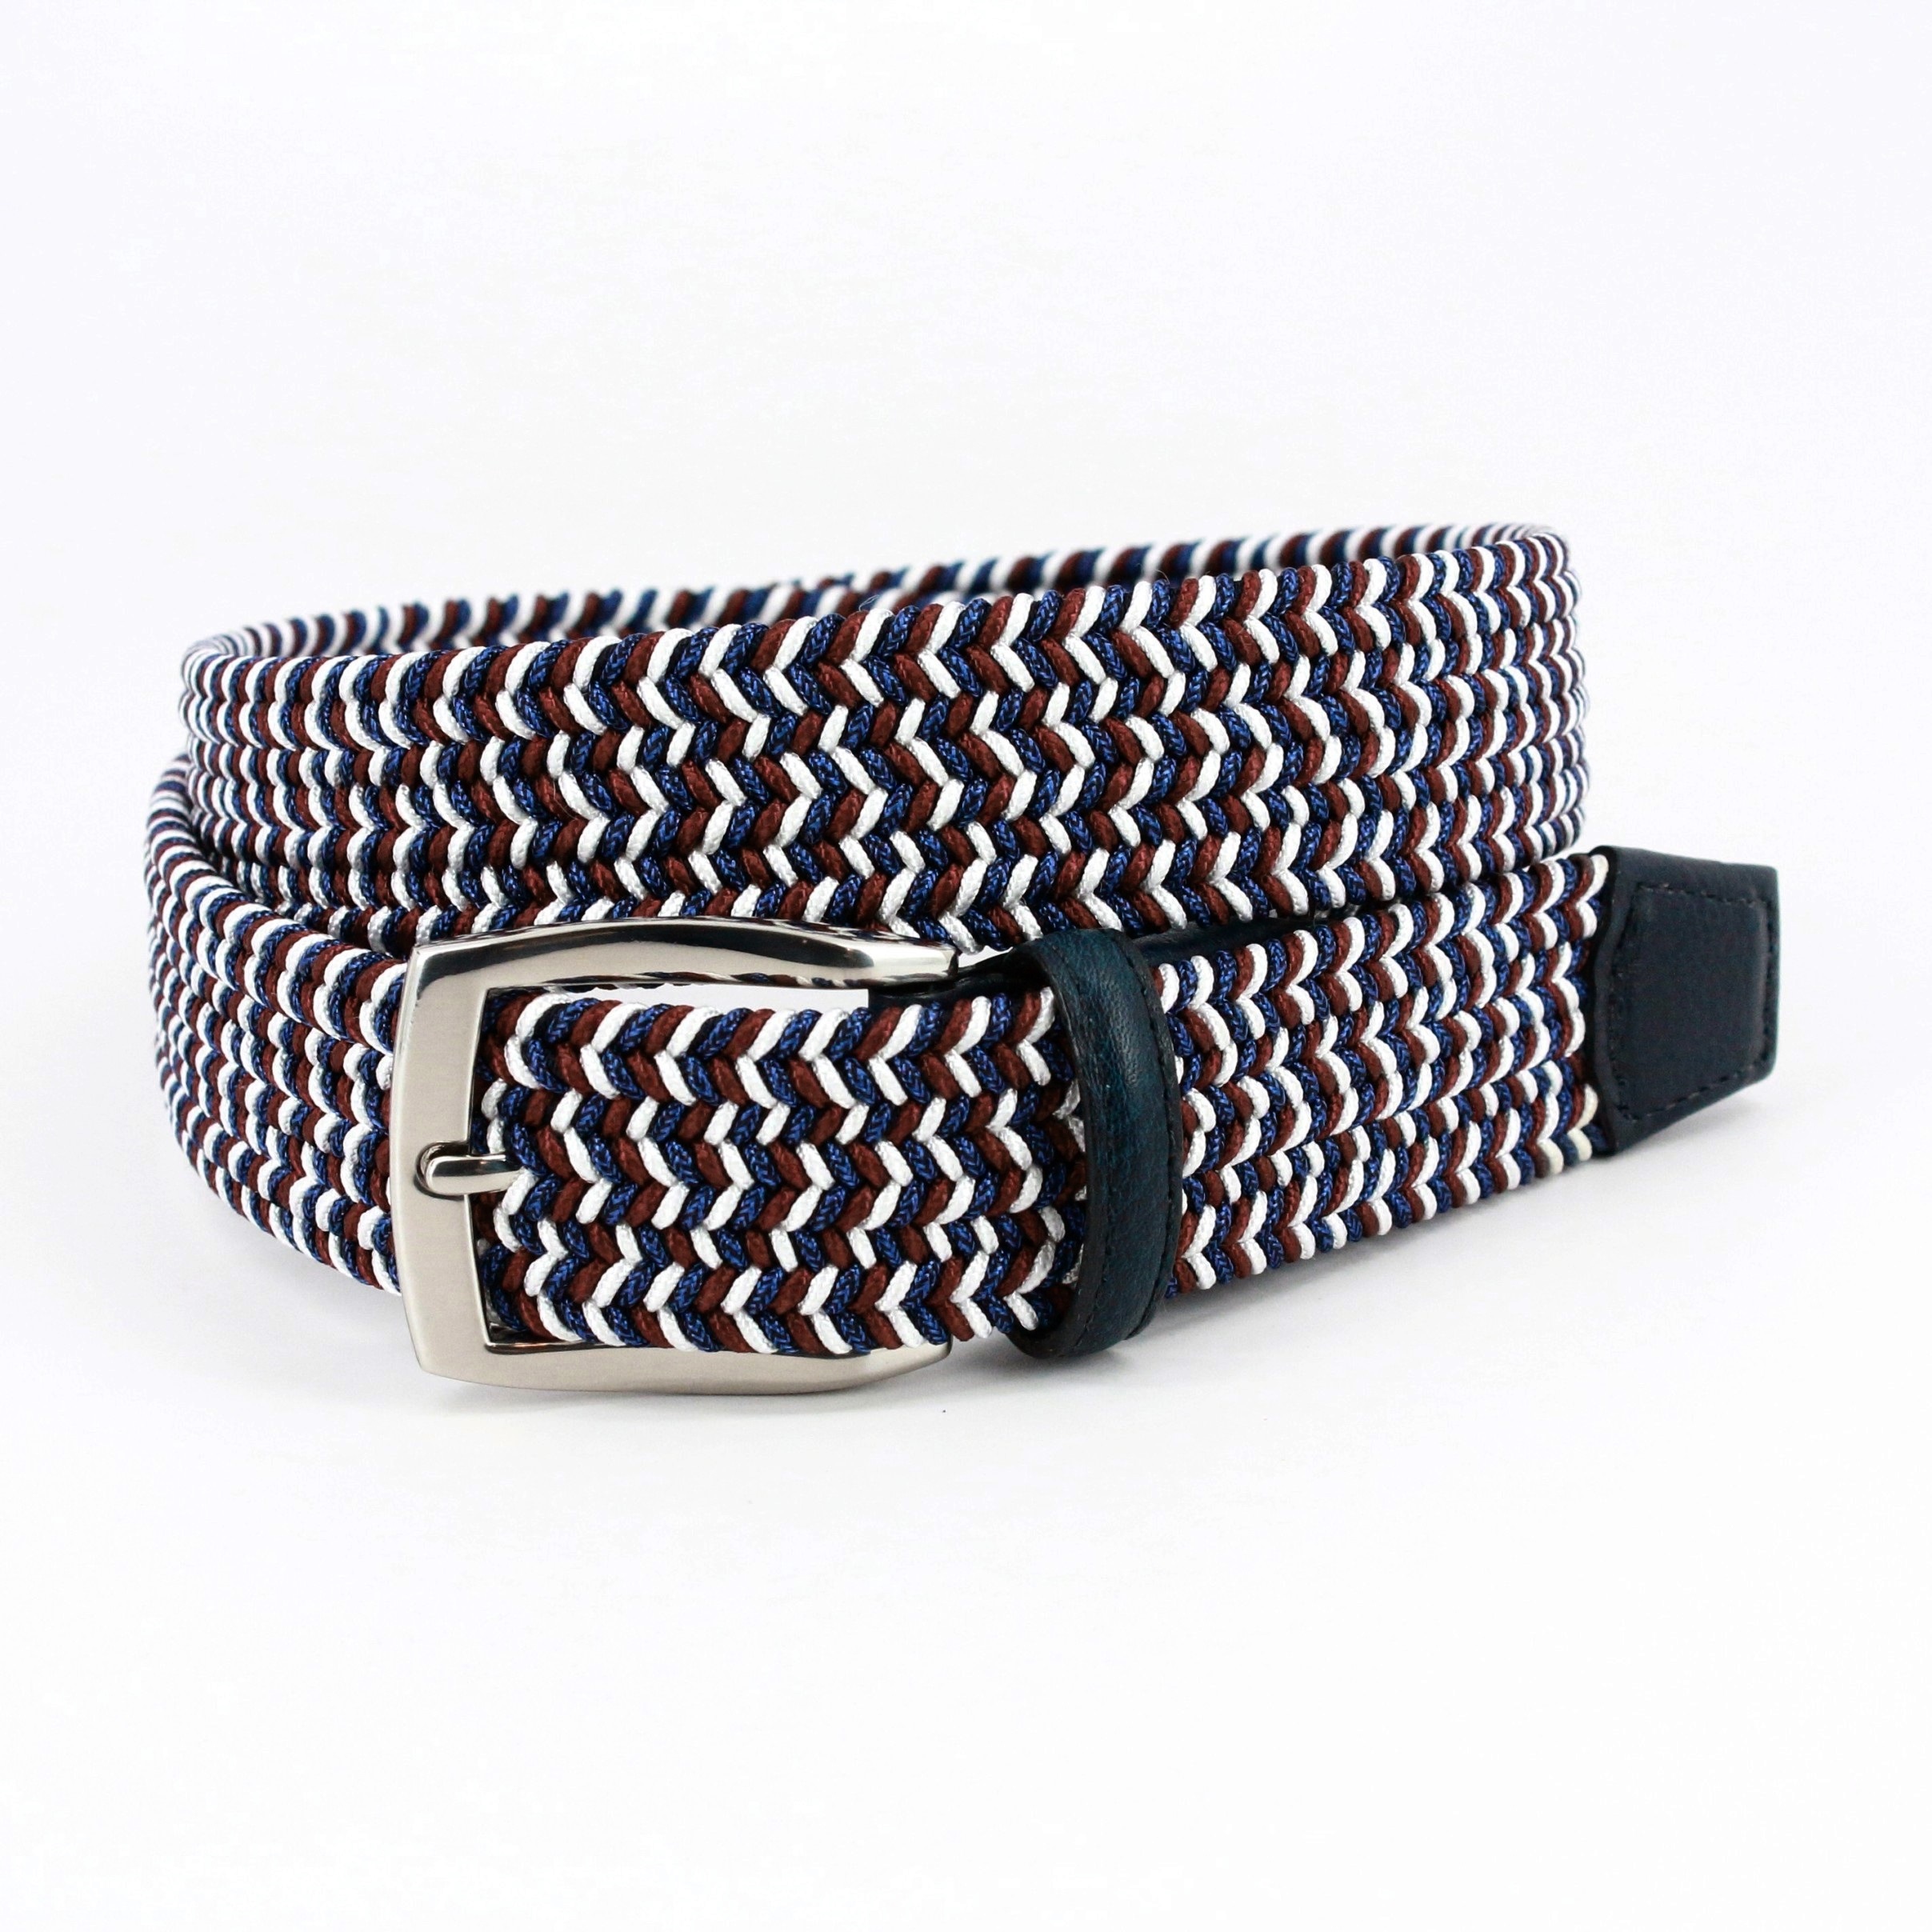 Italian Braided Elastic Rayon Stretch Belt in Blue, Red and White by Torino  Leather Co. - Hansen's Clothing